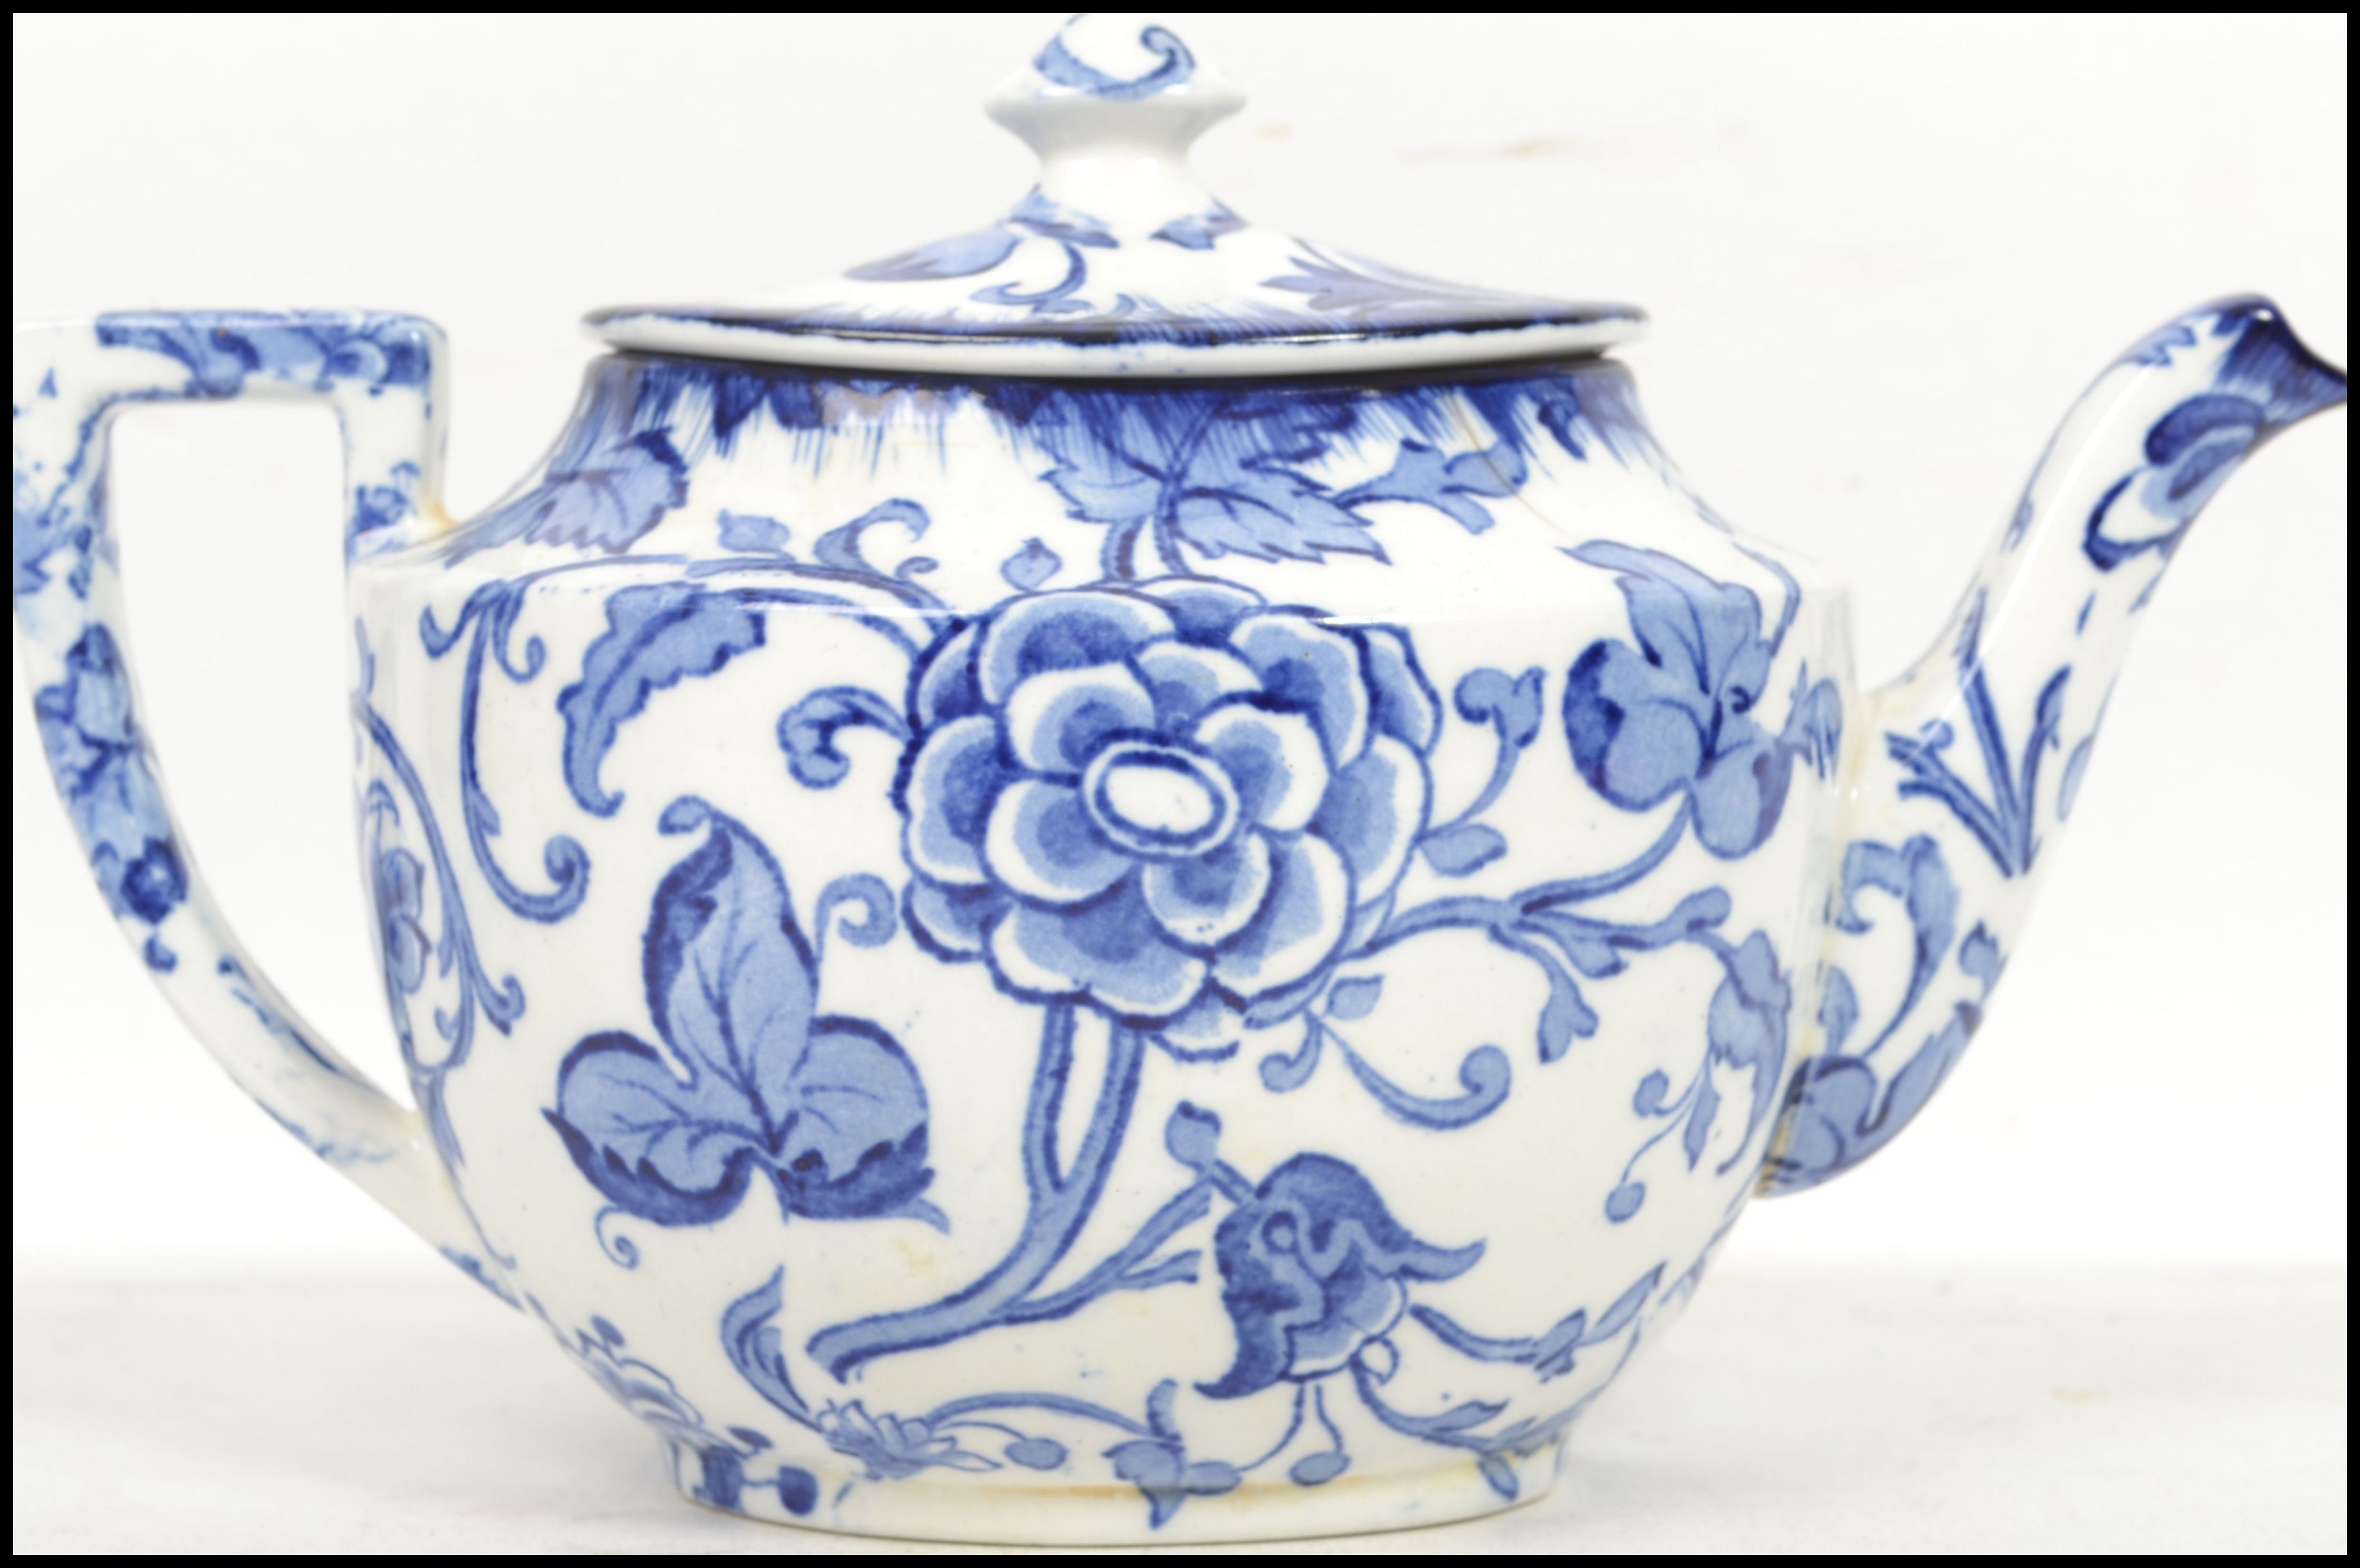 An early 20th century blue and white ceramic teapo - Image 3 of 7